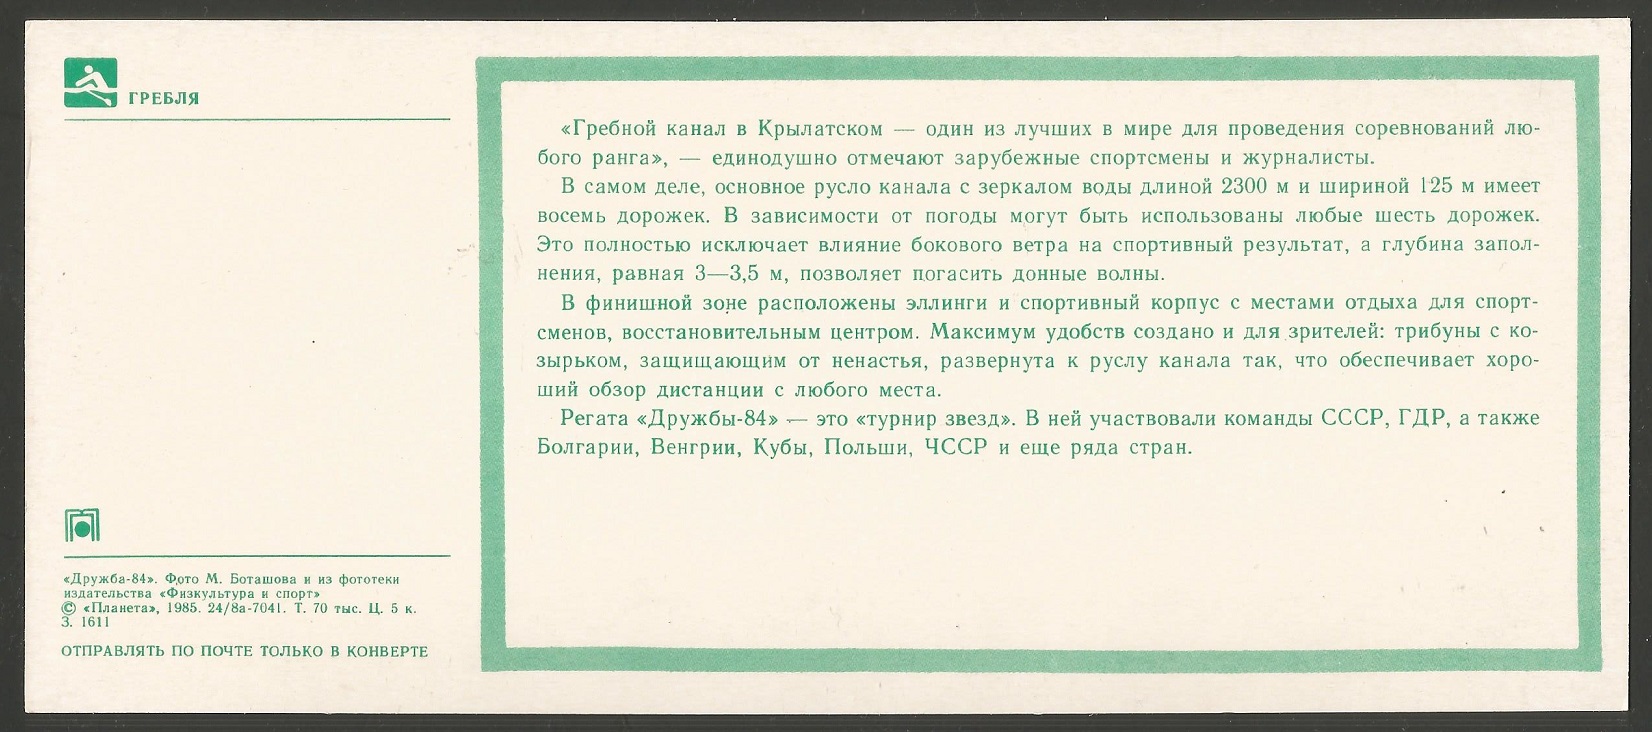 Illustrated card URS 1985 M8 with pictogram reverse